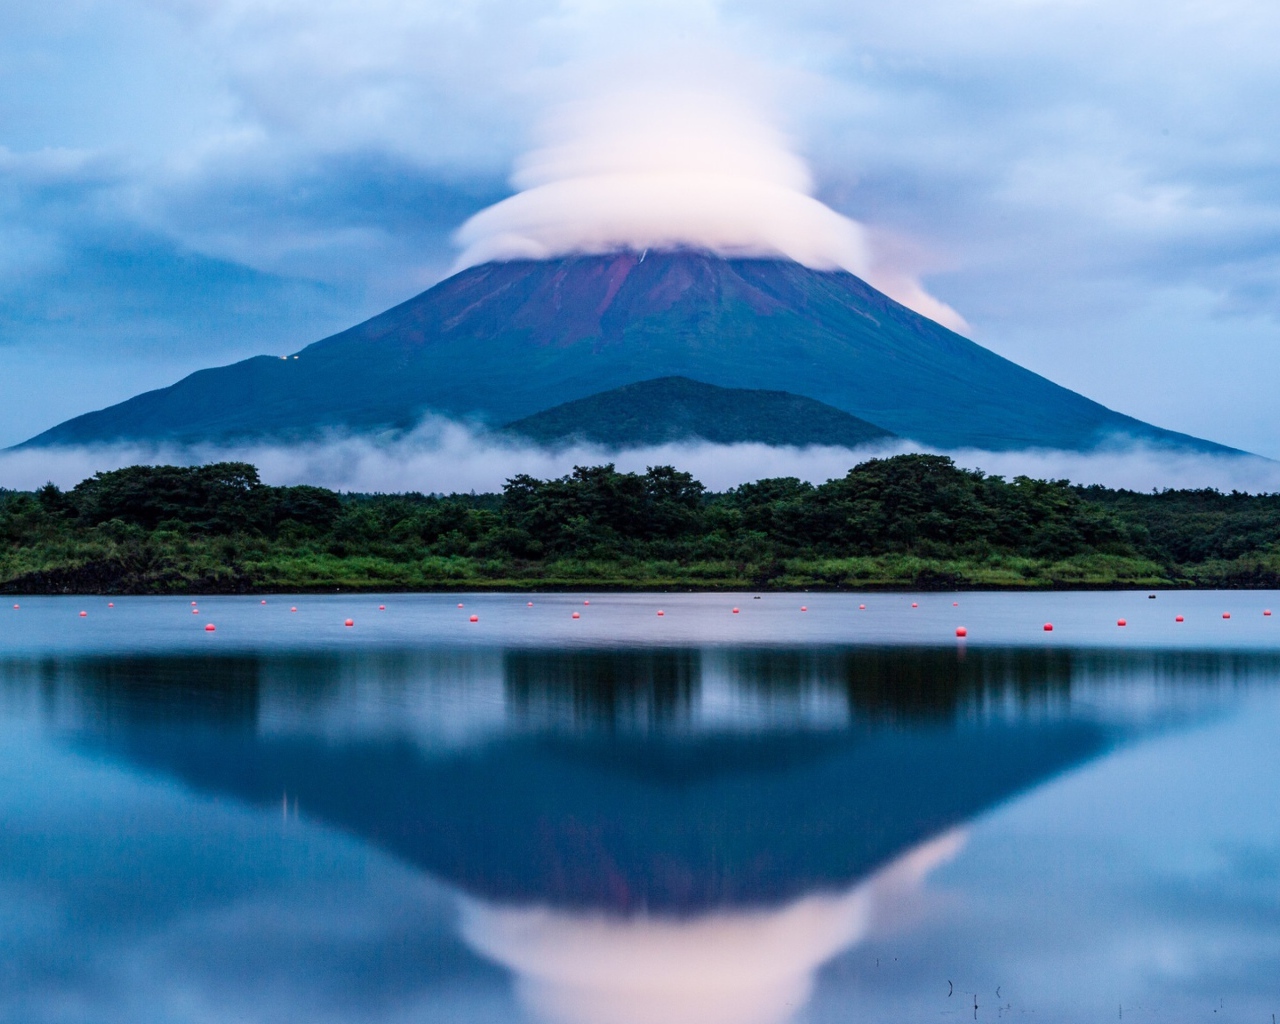 The Fuji volcano in white clouds is reflected in the lake water